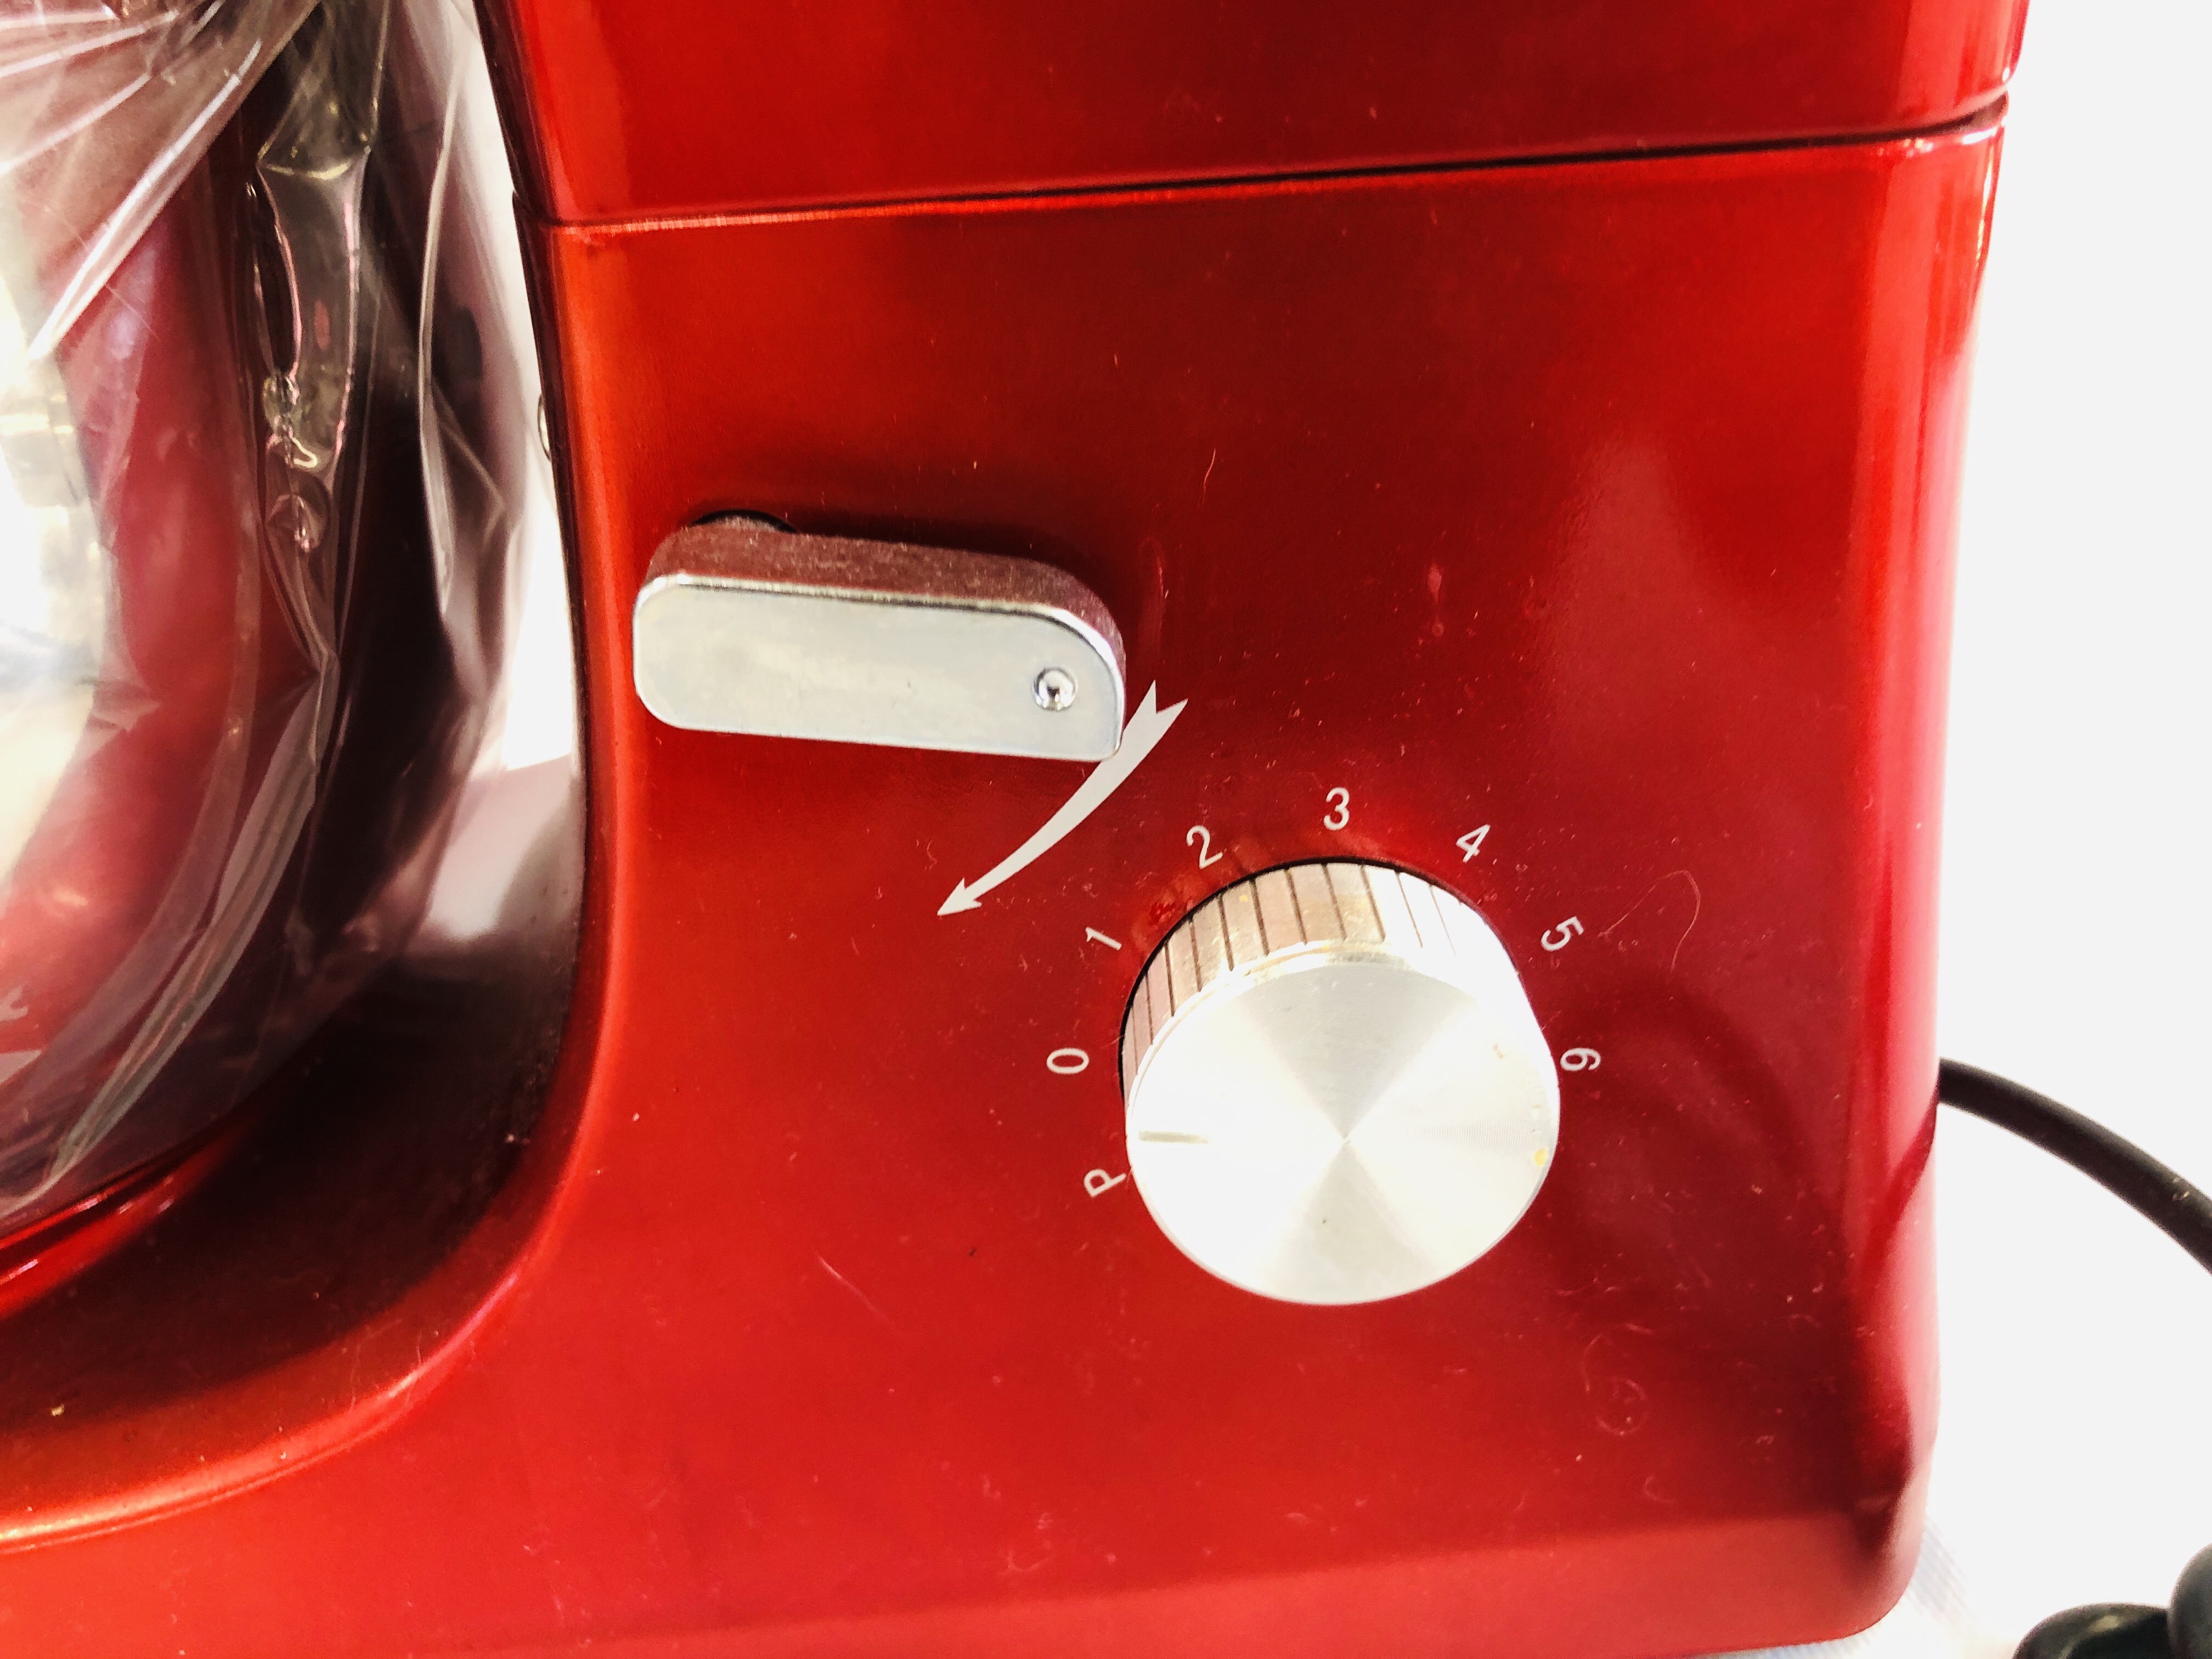 A "CUCINA" BY GIANI ELECTRIC FOOD STAND MIXER, RED FINISH (NEW UNBOXED) - SOLD AS SEEN. - Image 3 of 4